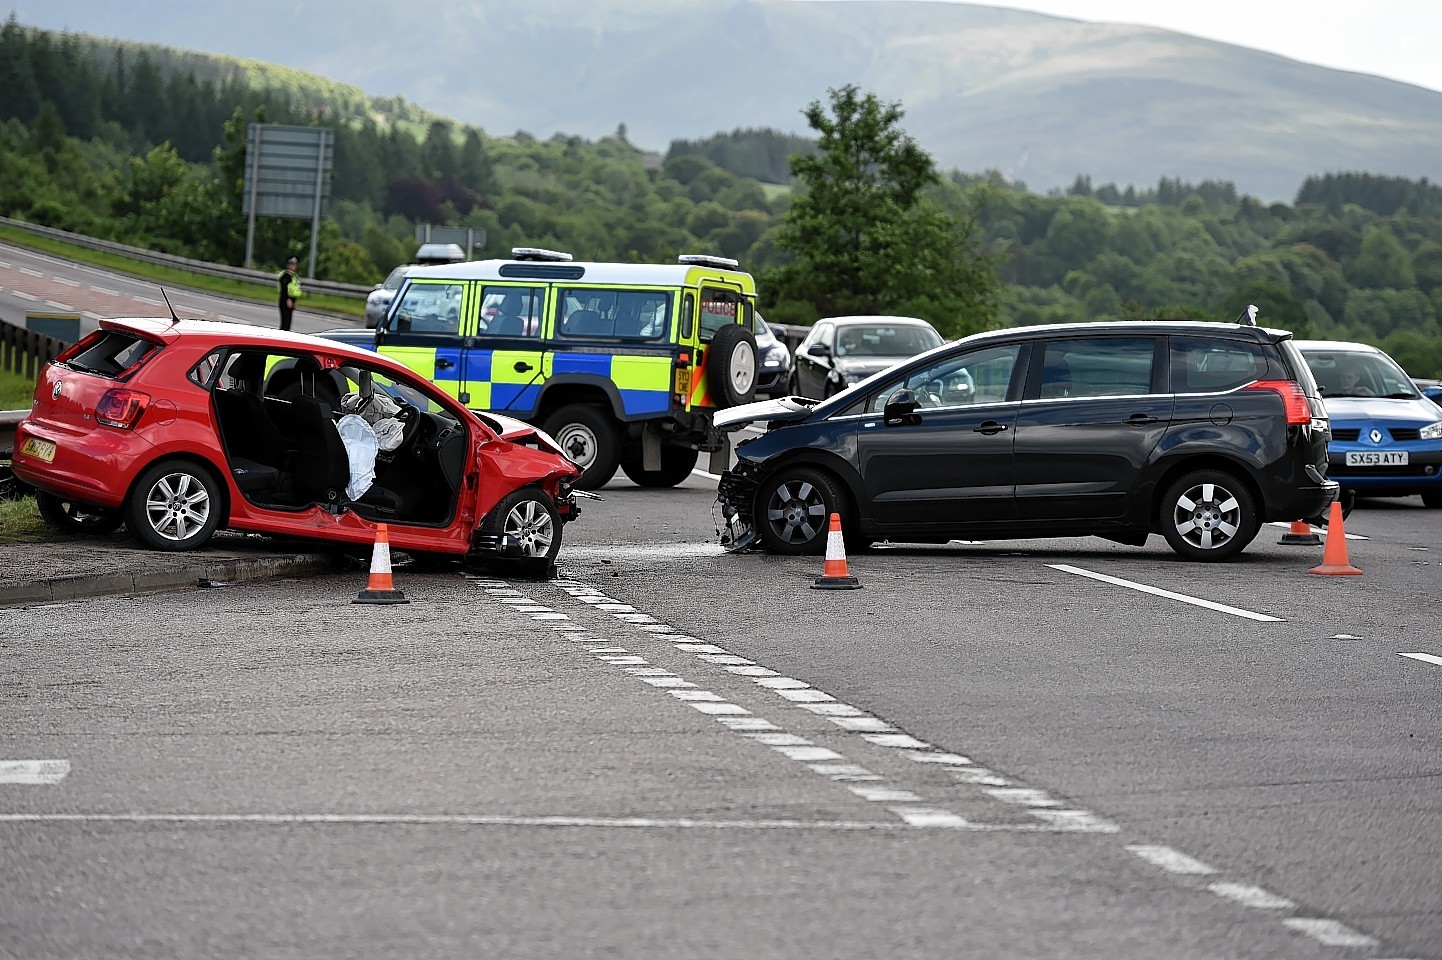 The collision between two cars on the A95 at the Craigellachie junction. Picture by Gordon Lennox